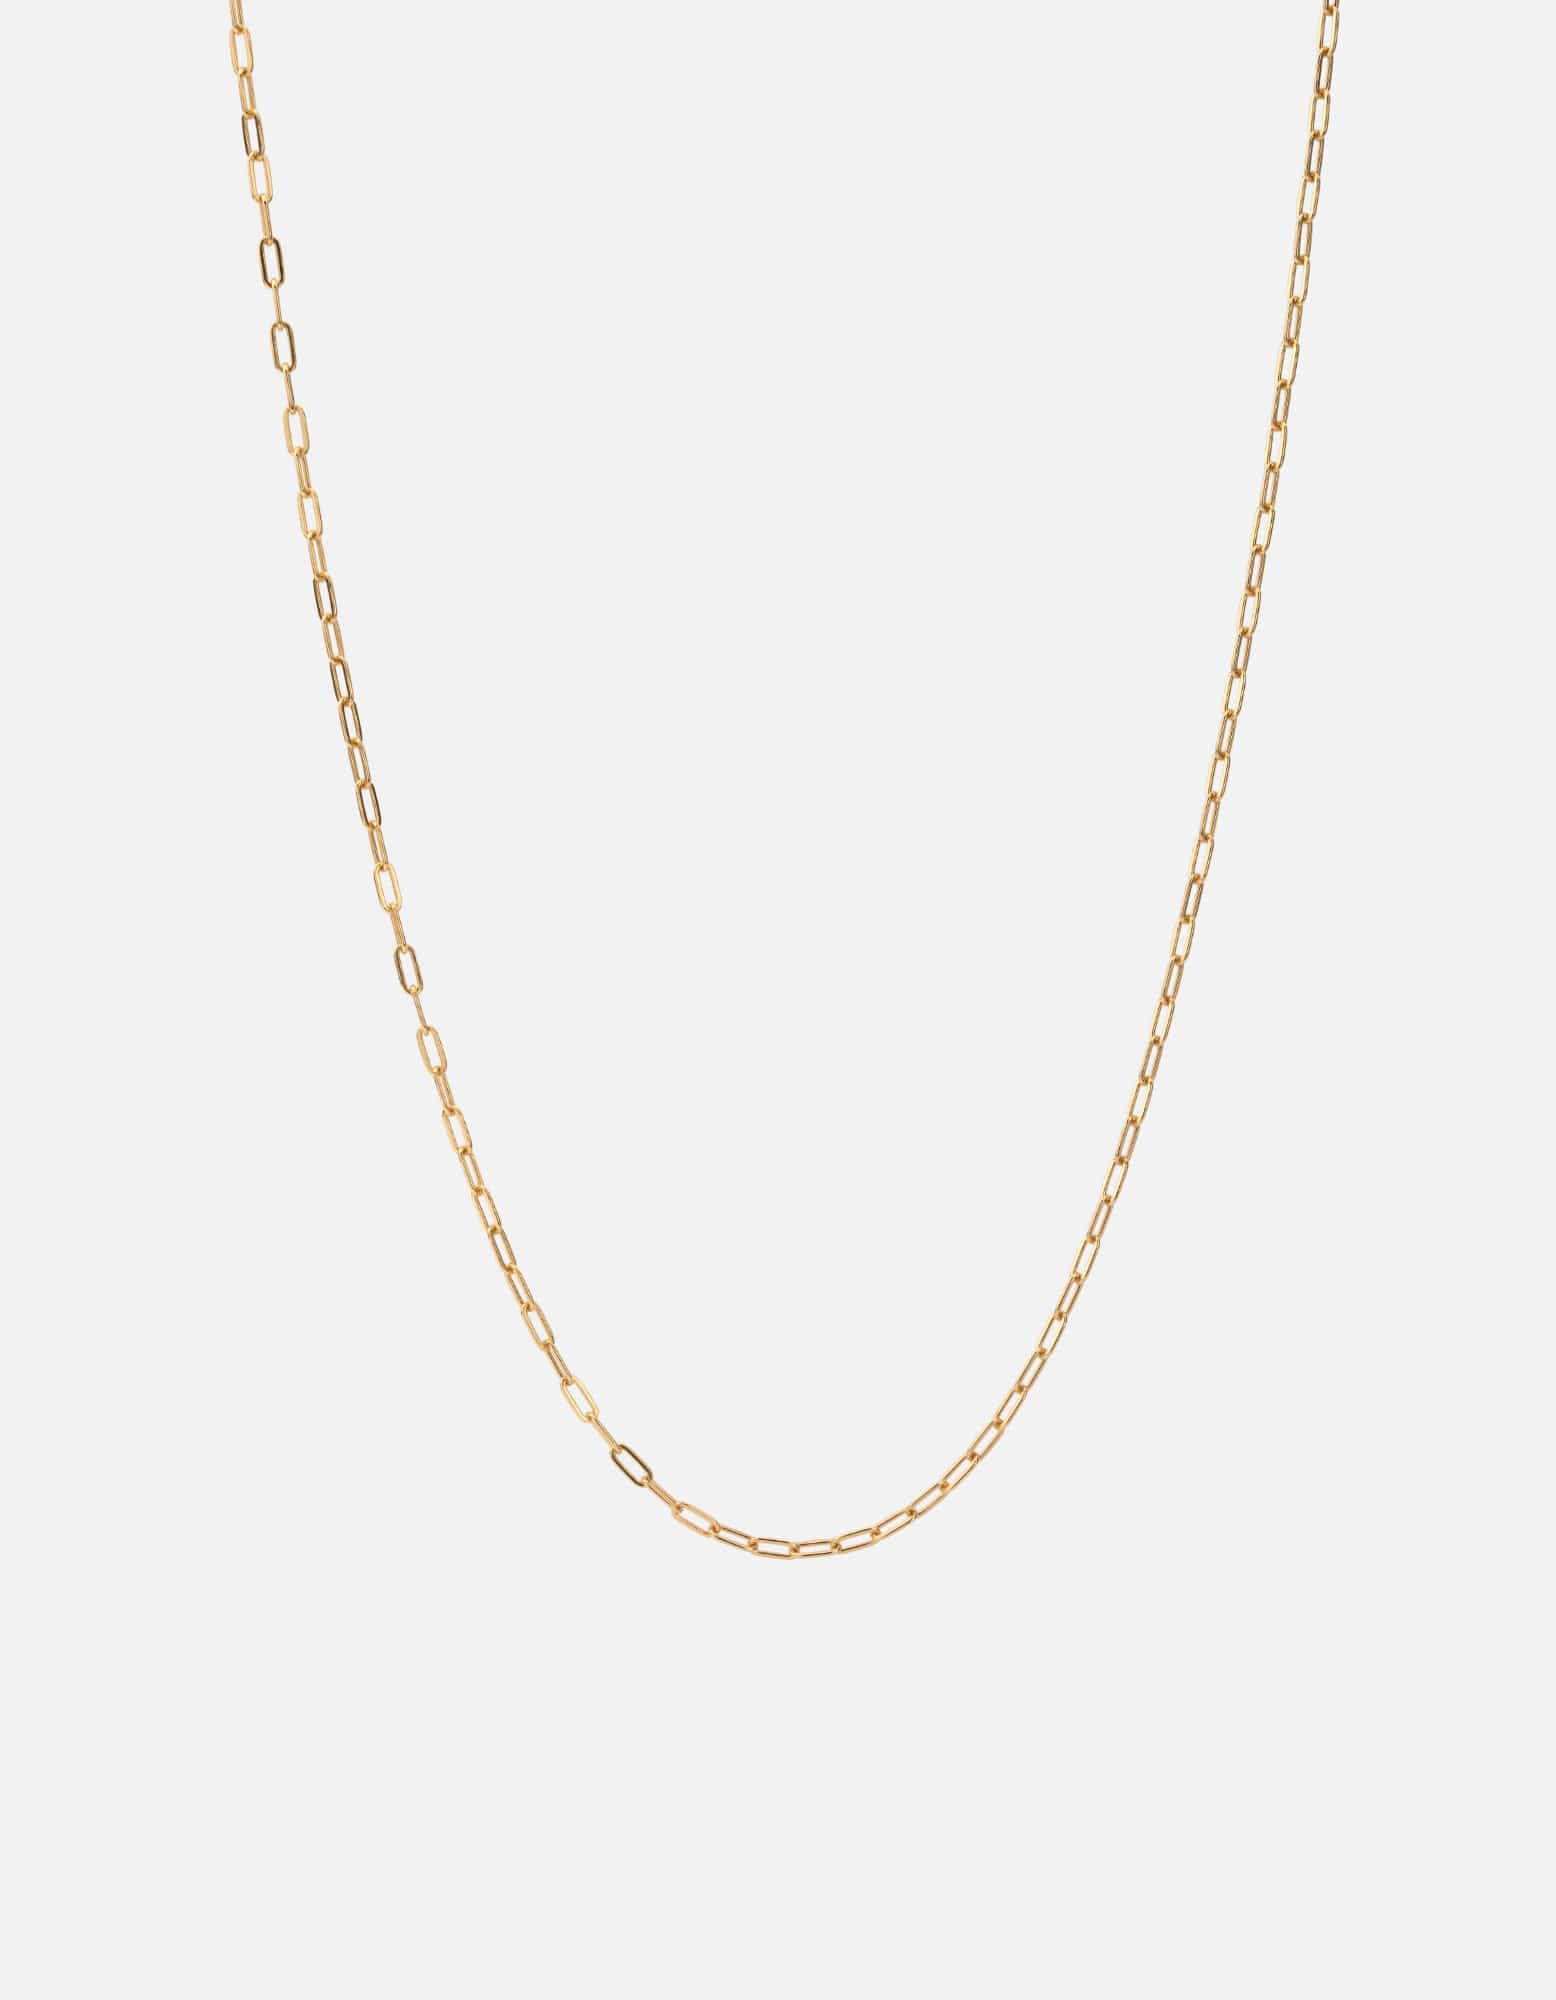 2.5mm Volt Link Cable Chain Necklace, 14k Gold